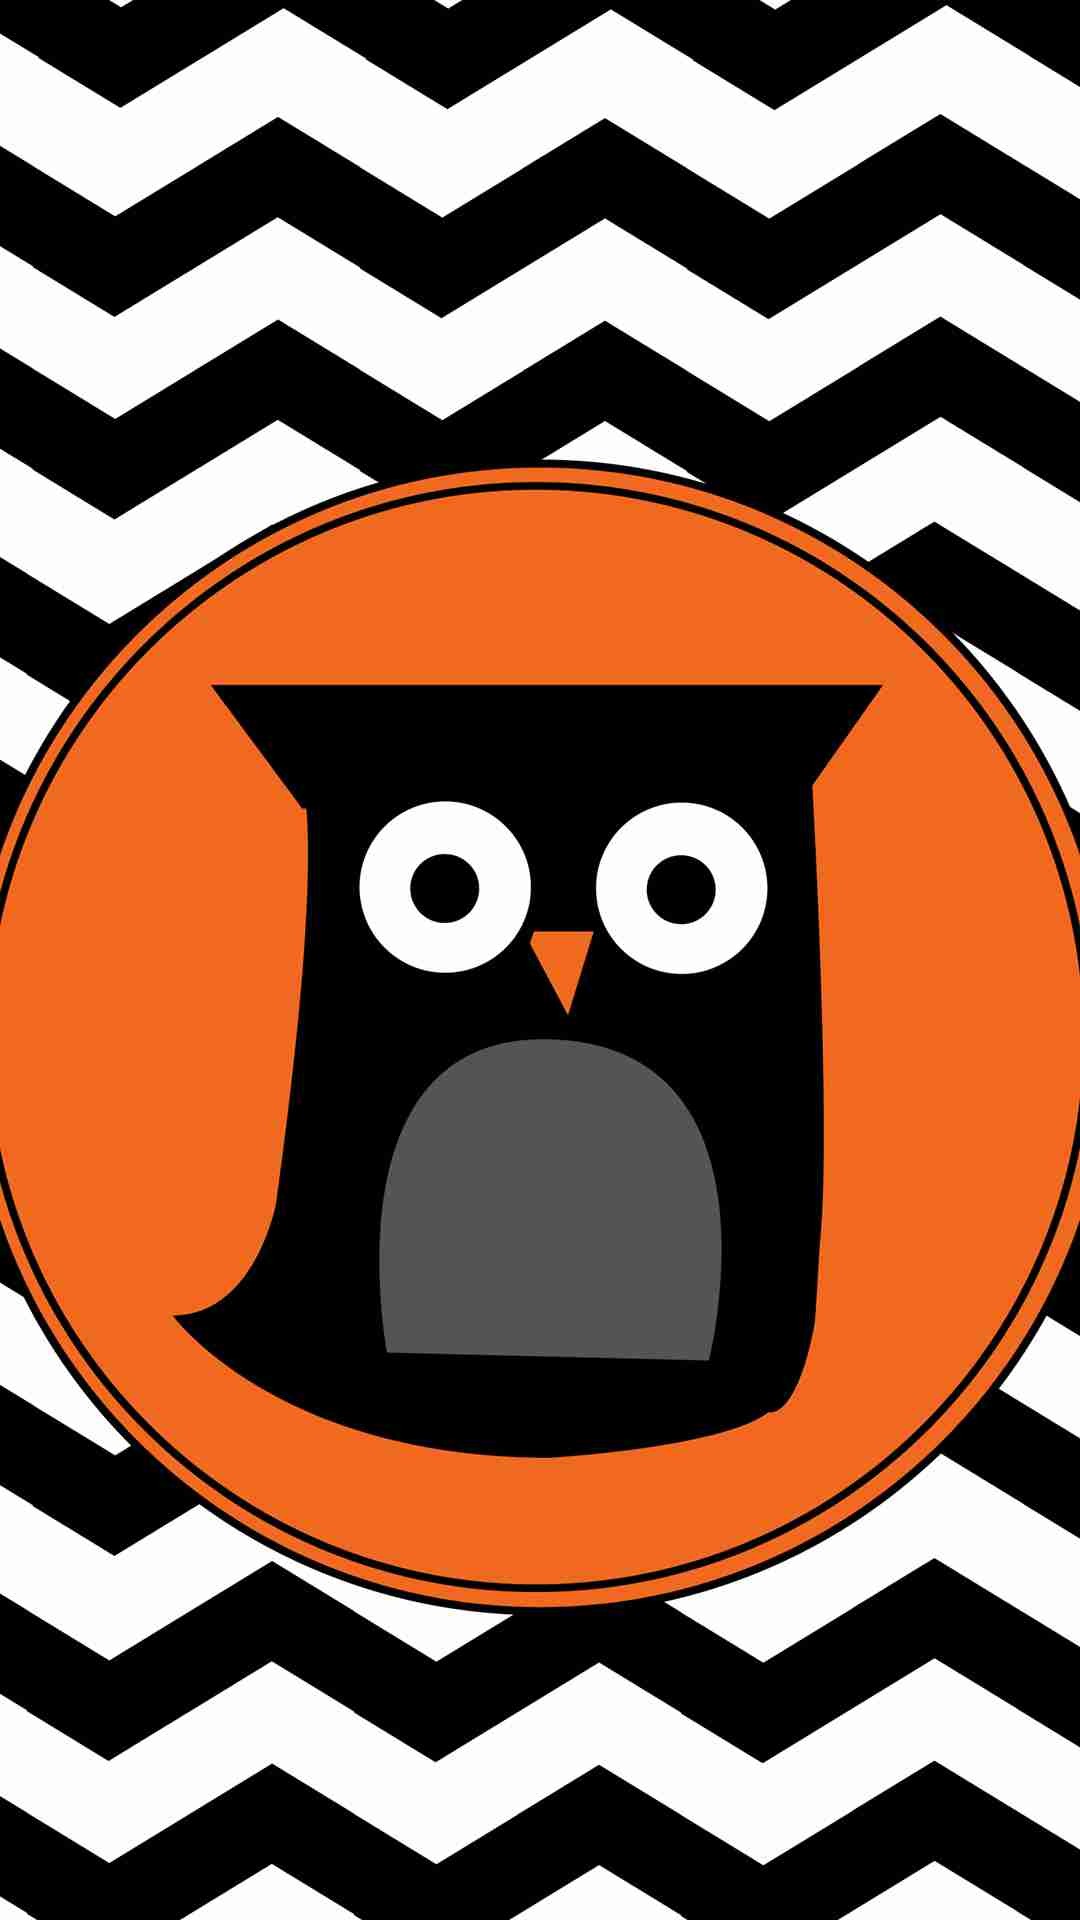 Cartoon Owl And Chevron Pattern Iphone 6 Plus Wallpaper Personalized Orange Circle Iphone 6 Plus Zebra Pattern Wallpaper Iphone 6 Plus Wallpaper That You Should Know By Lancome Loveitsomuch